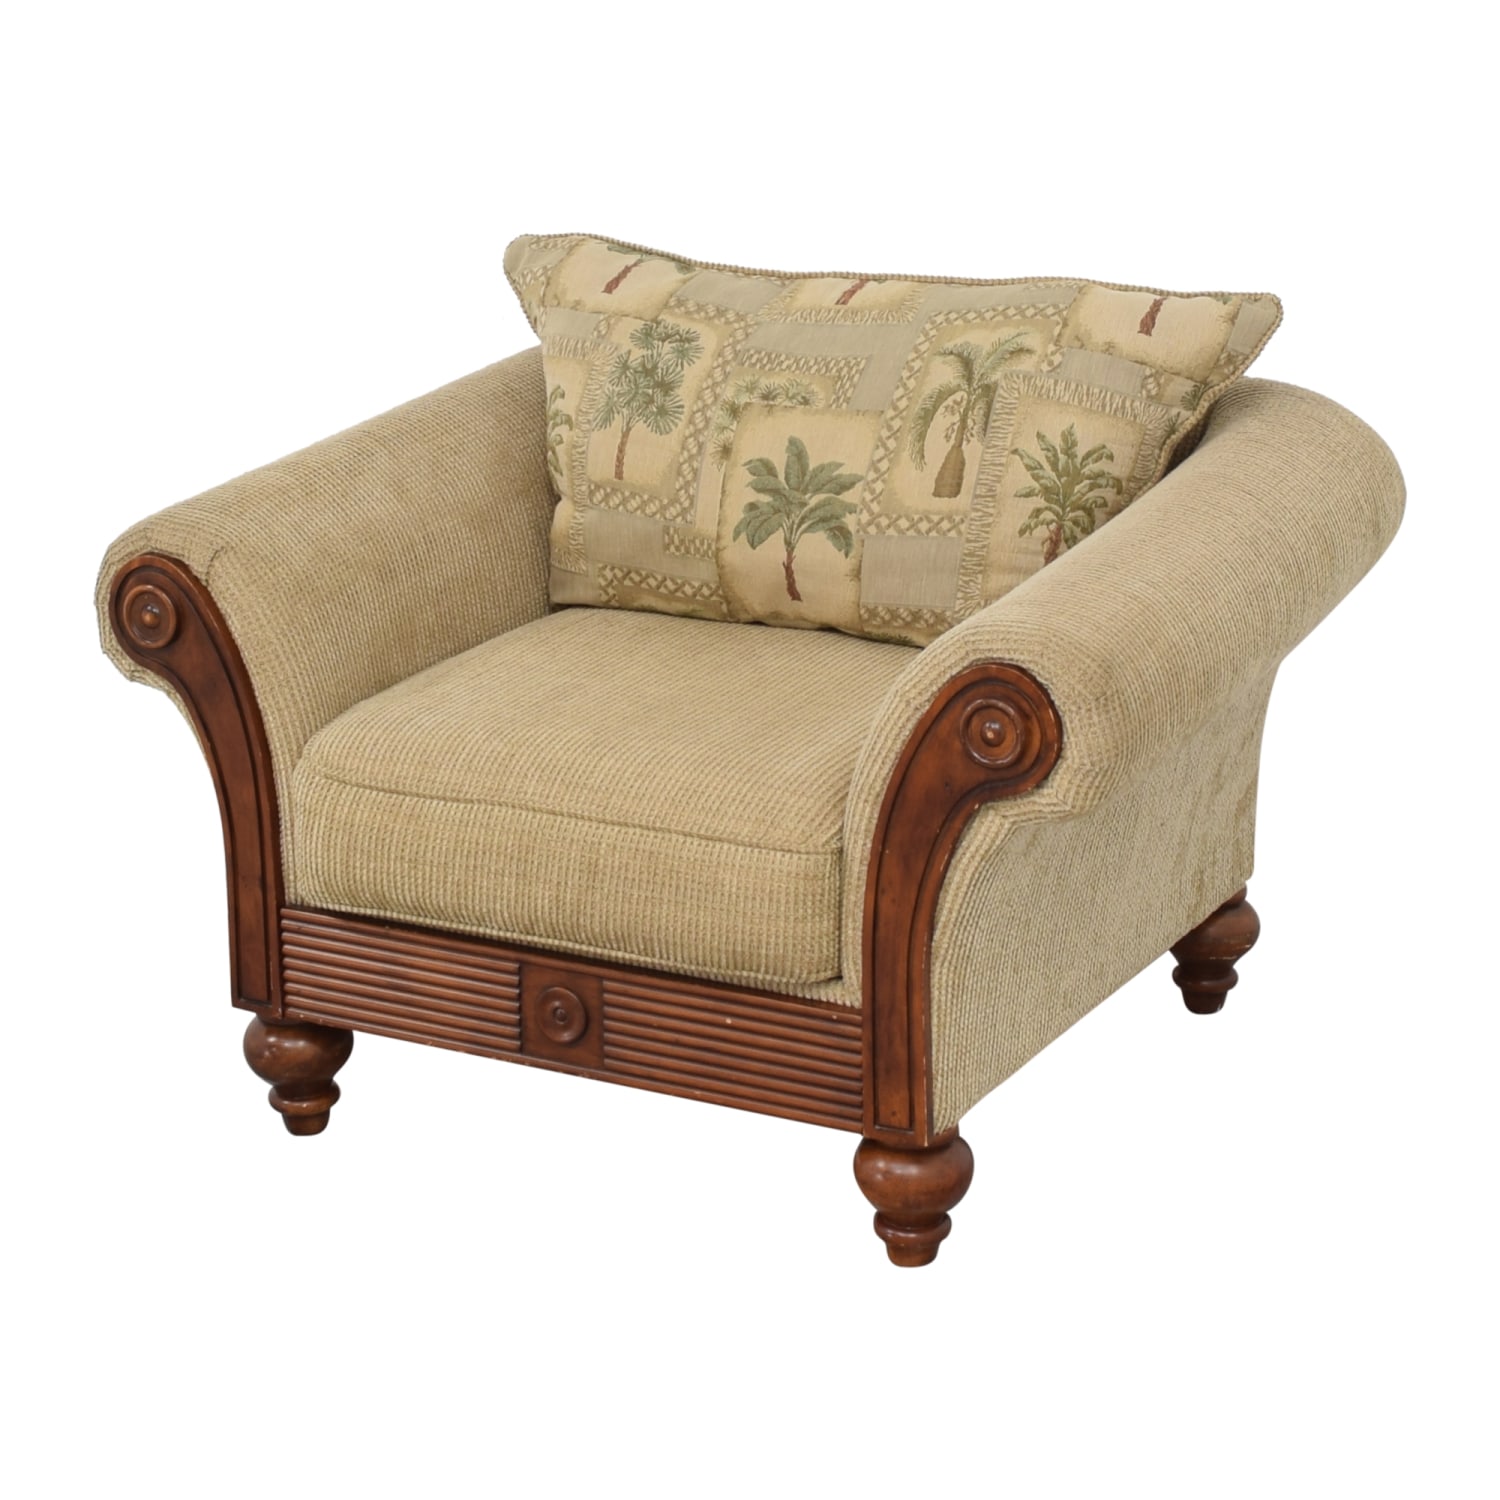 Klaussner Klaussner Club Chair coupon